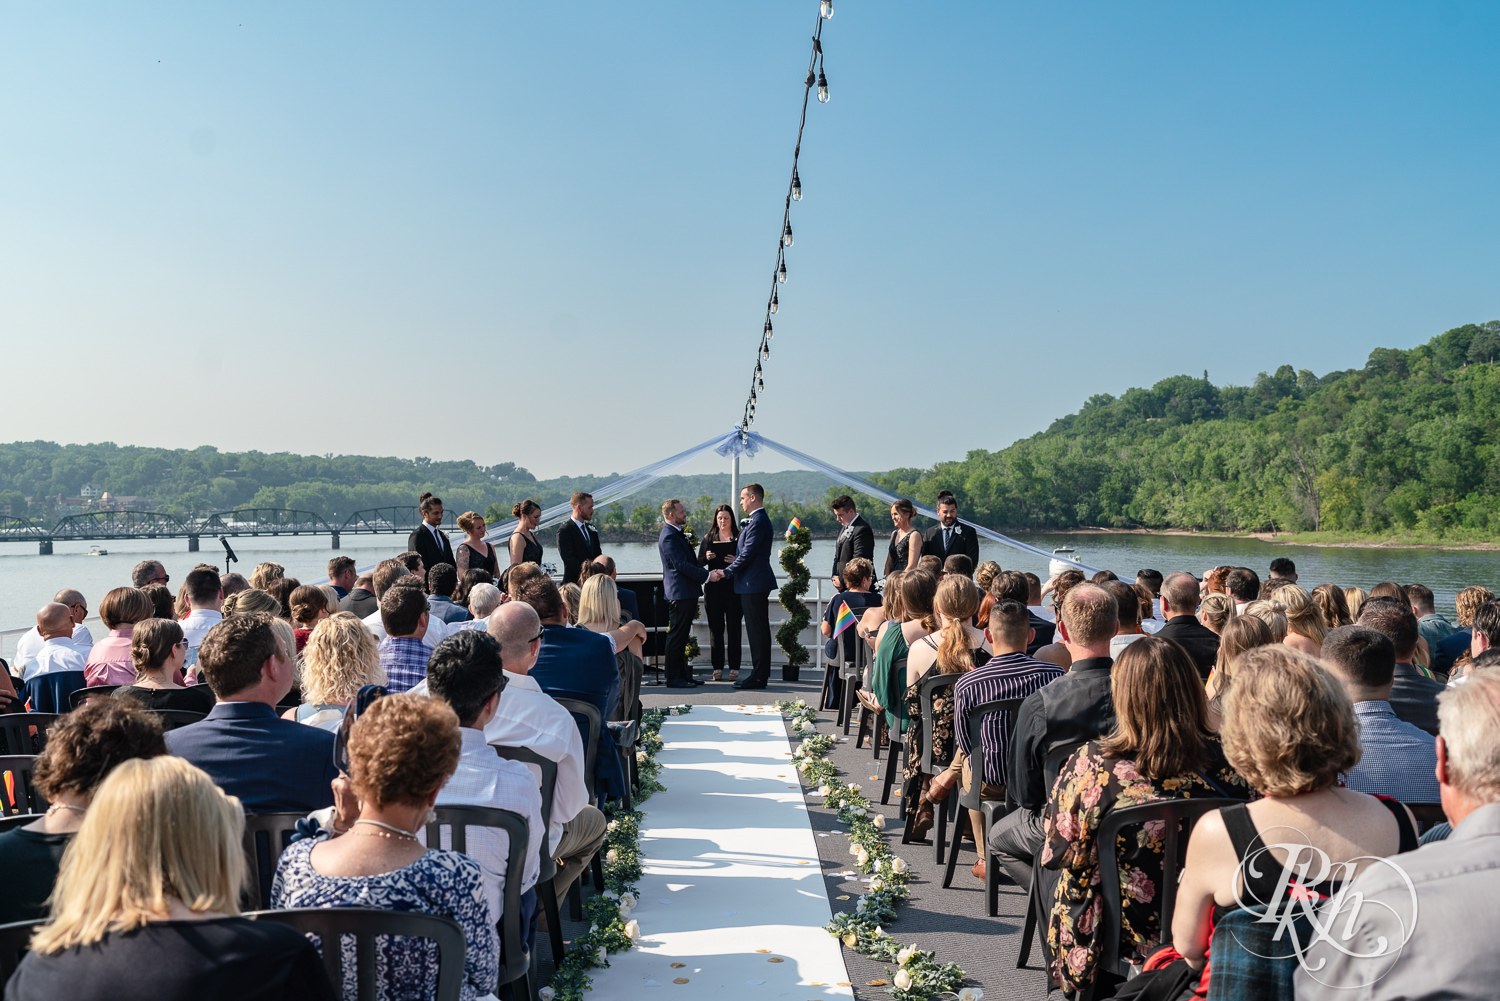 Grooms take part in wedding ceremony on the Majestic Star by Stillwater River Boats in Stillwater, Minnesota.